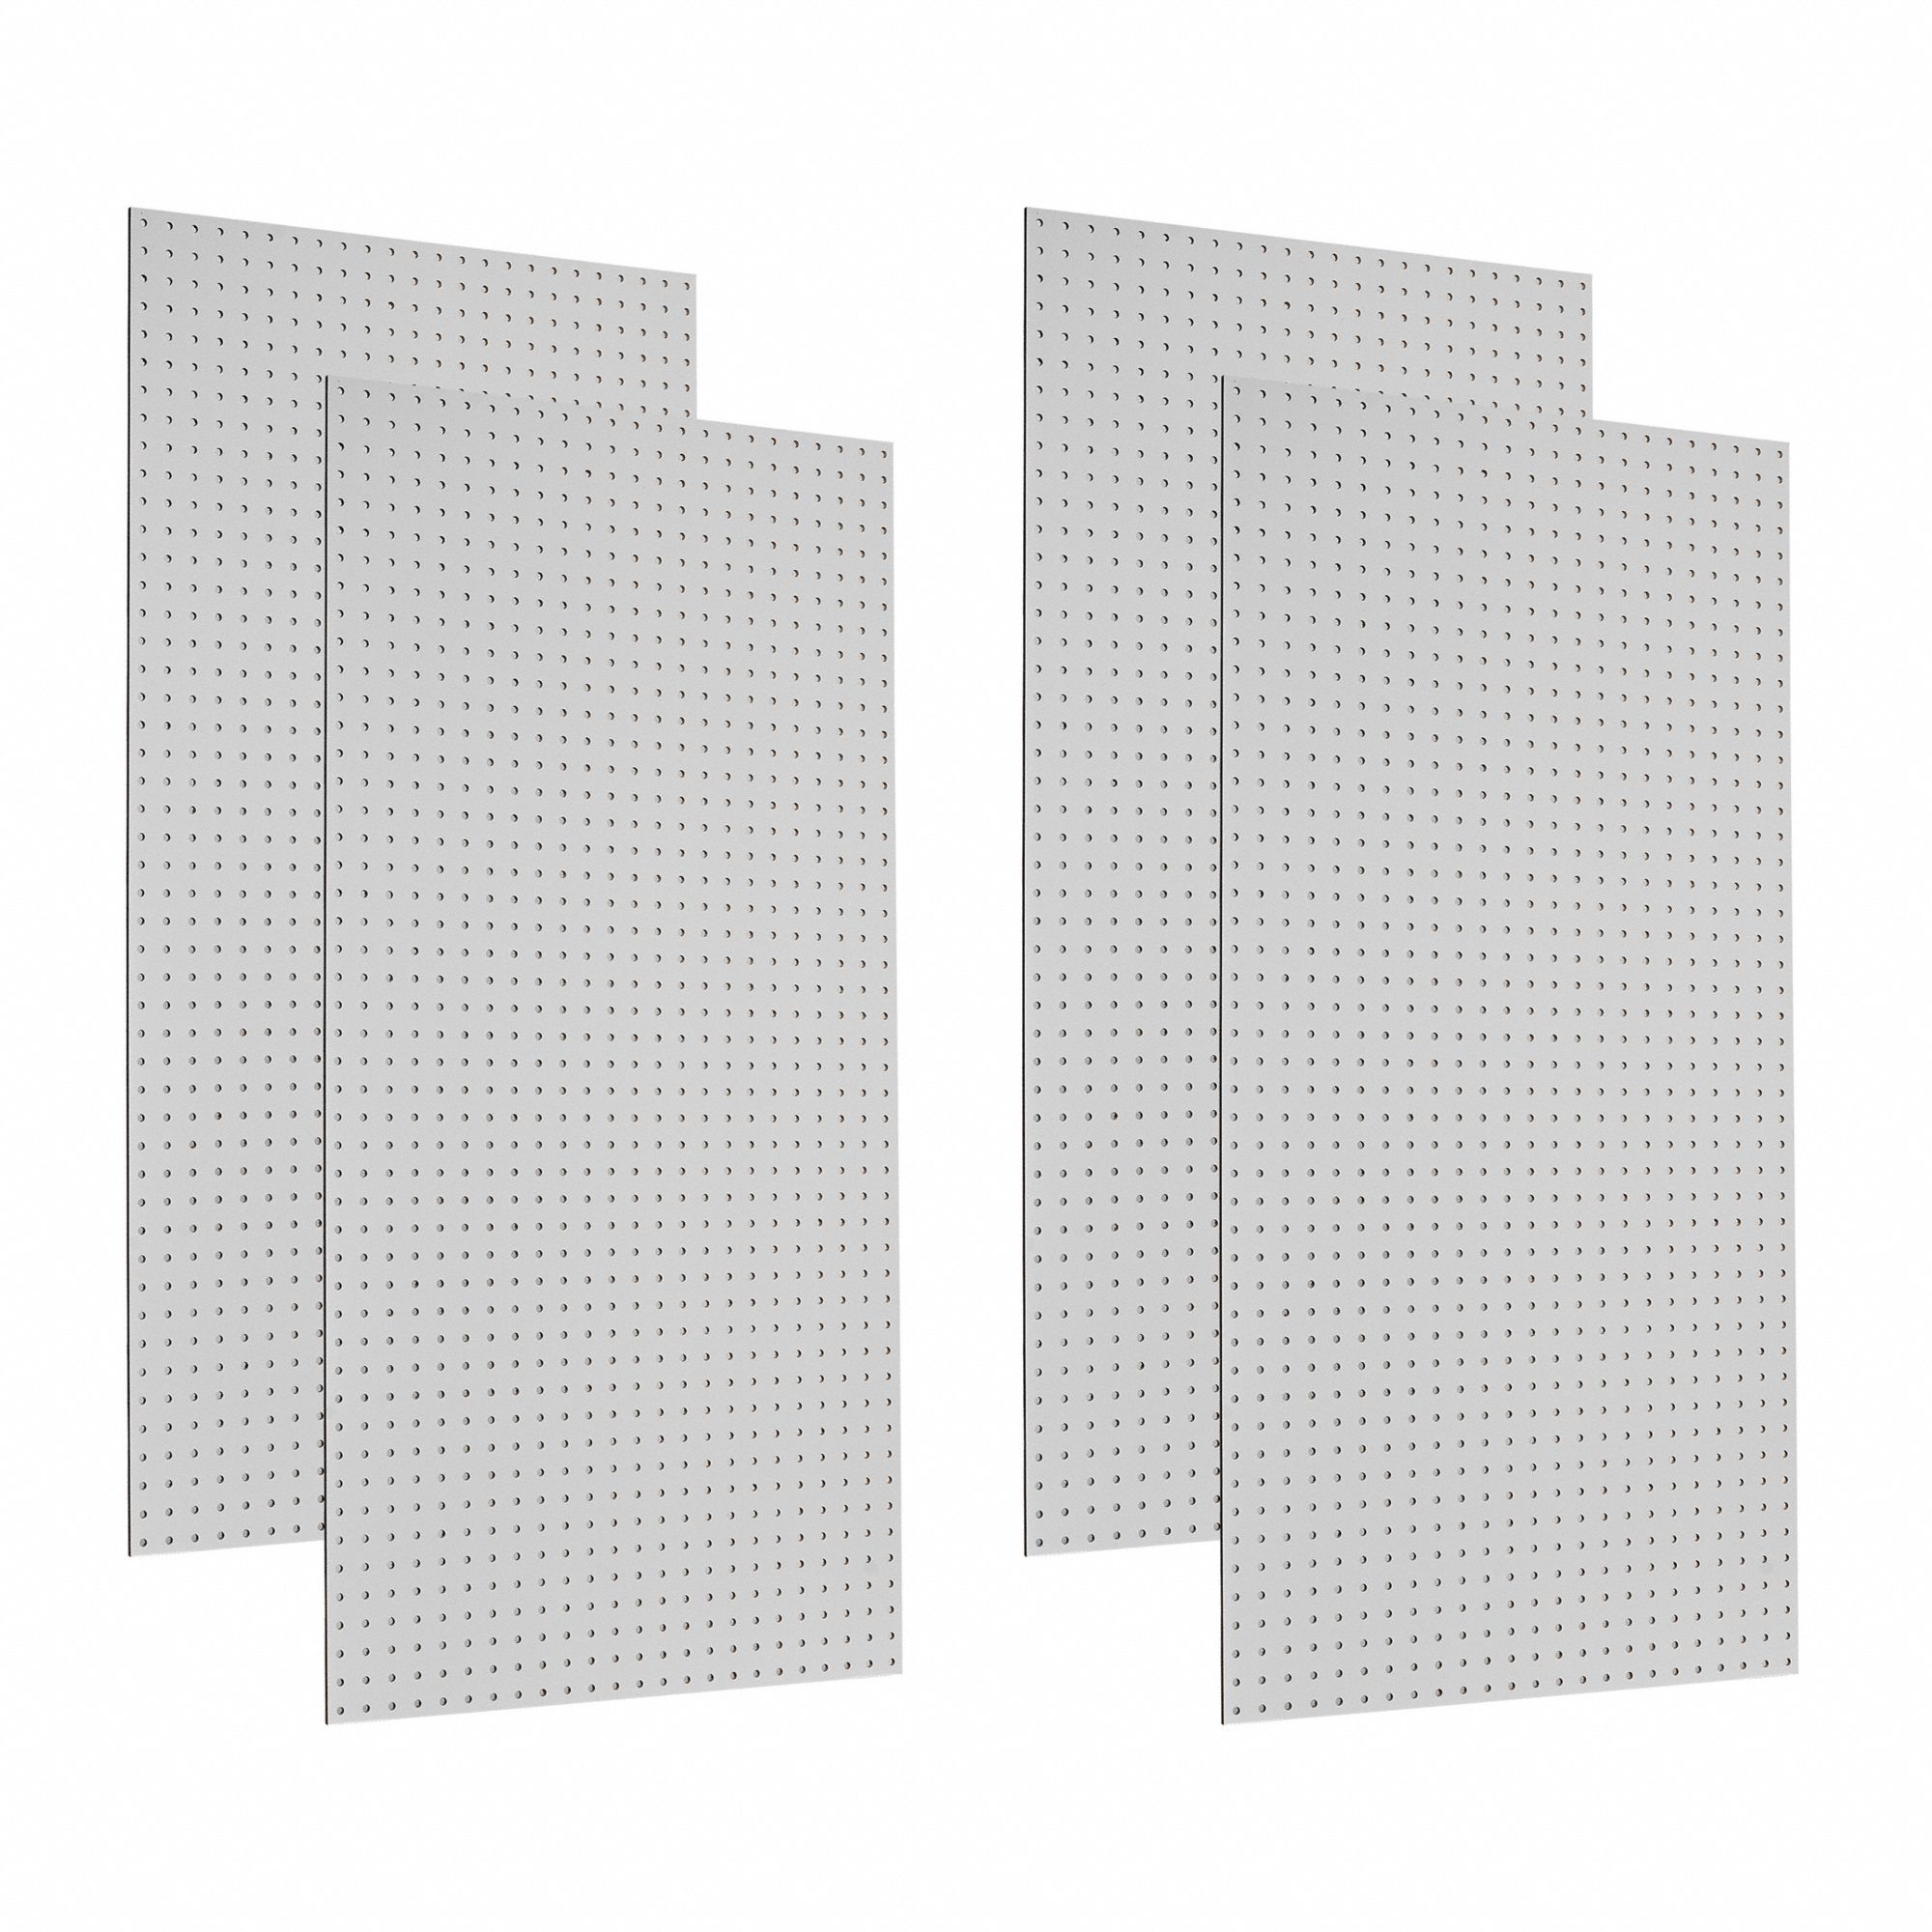 Pegboard Panel: Round, 1/4 in Peg Hole Size, 48 in x 24 in x 1/8 in, White